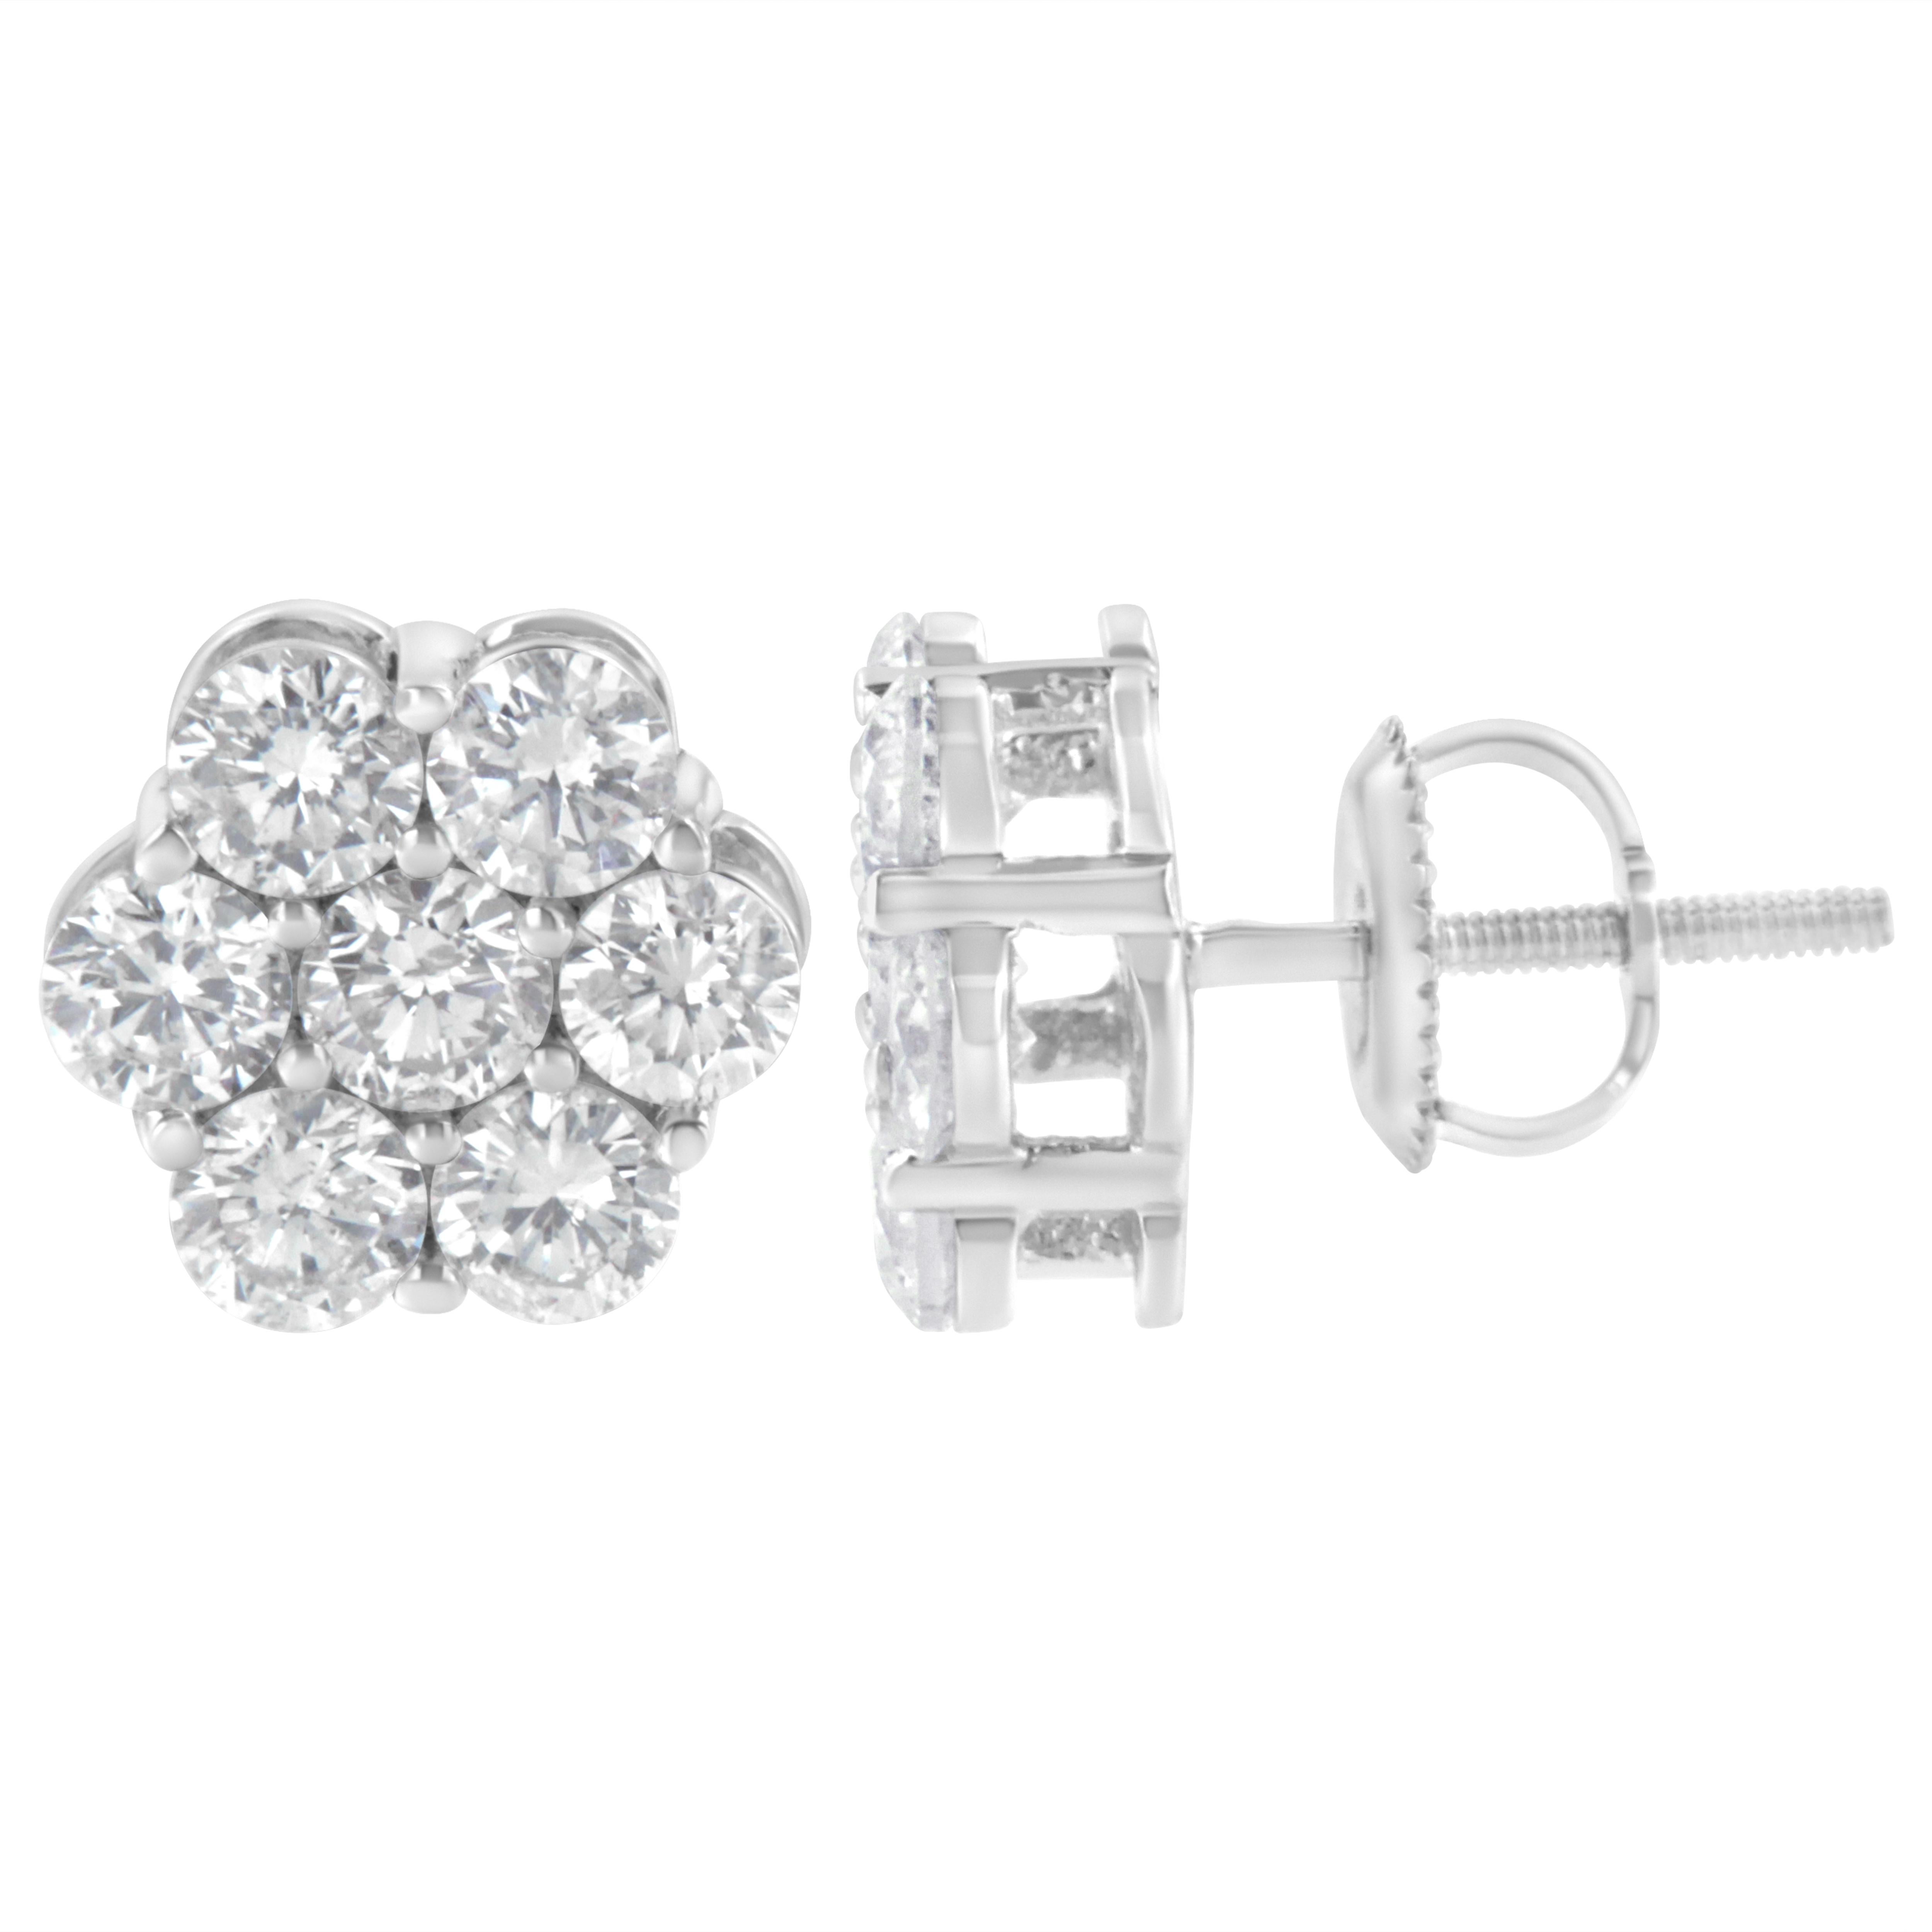 You will fall in love with these classic cluster stud earrings. A must have for any serious jewelry collection, these 14K white gold earrings boast an impressive 2.0 carat total weight of diamonds with seven stones each. The earrings are floral